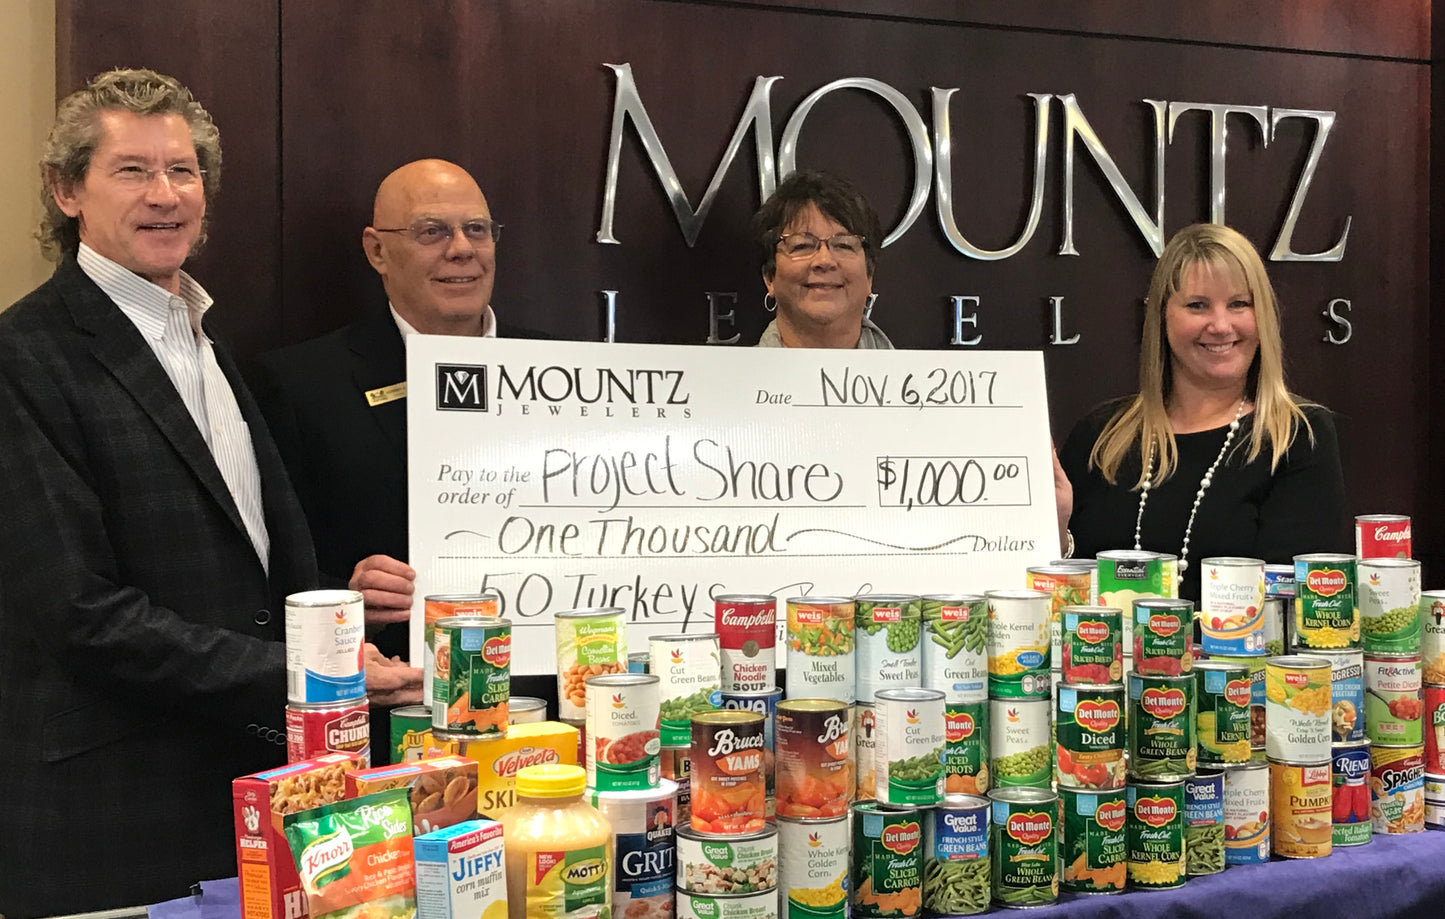 Mountz Jewelers donating to Project Share